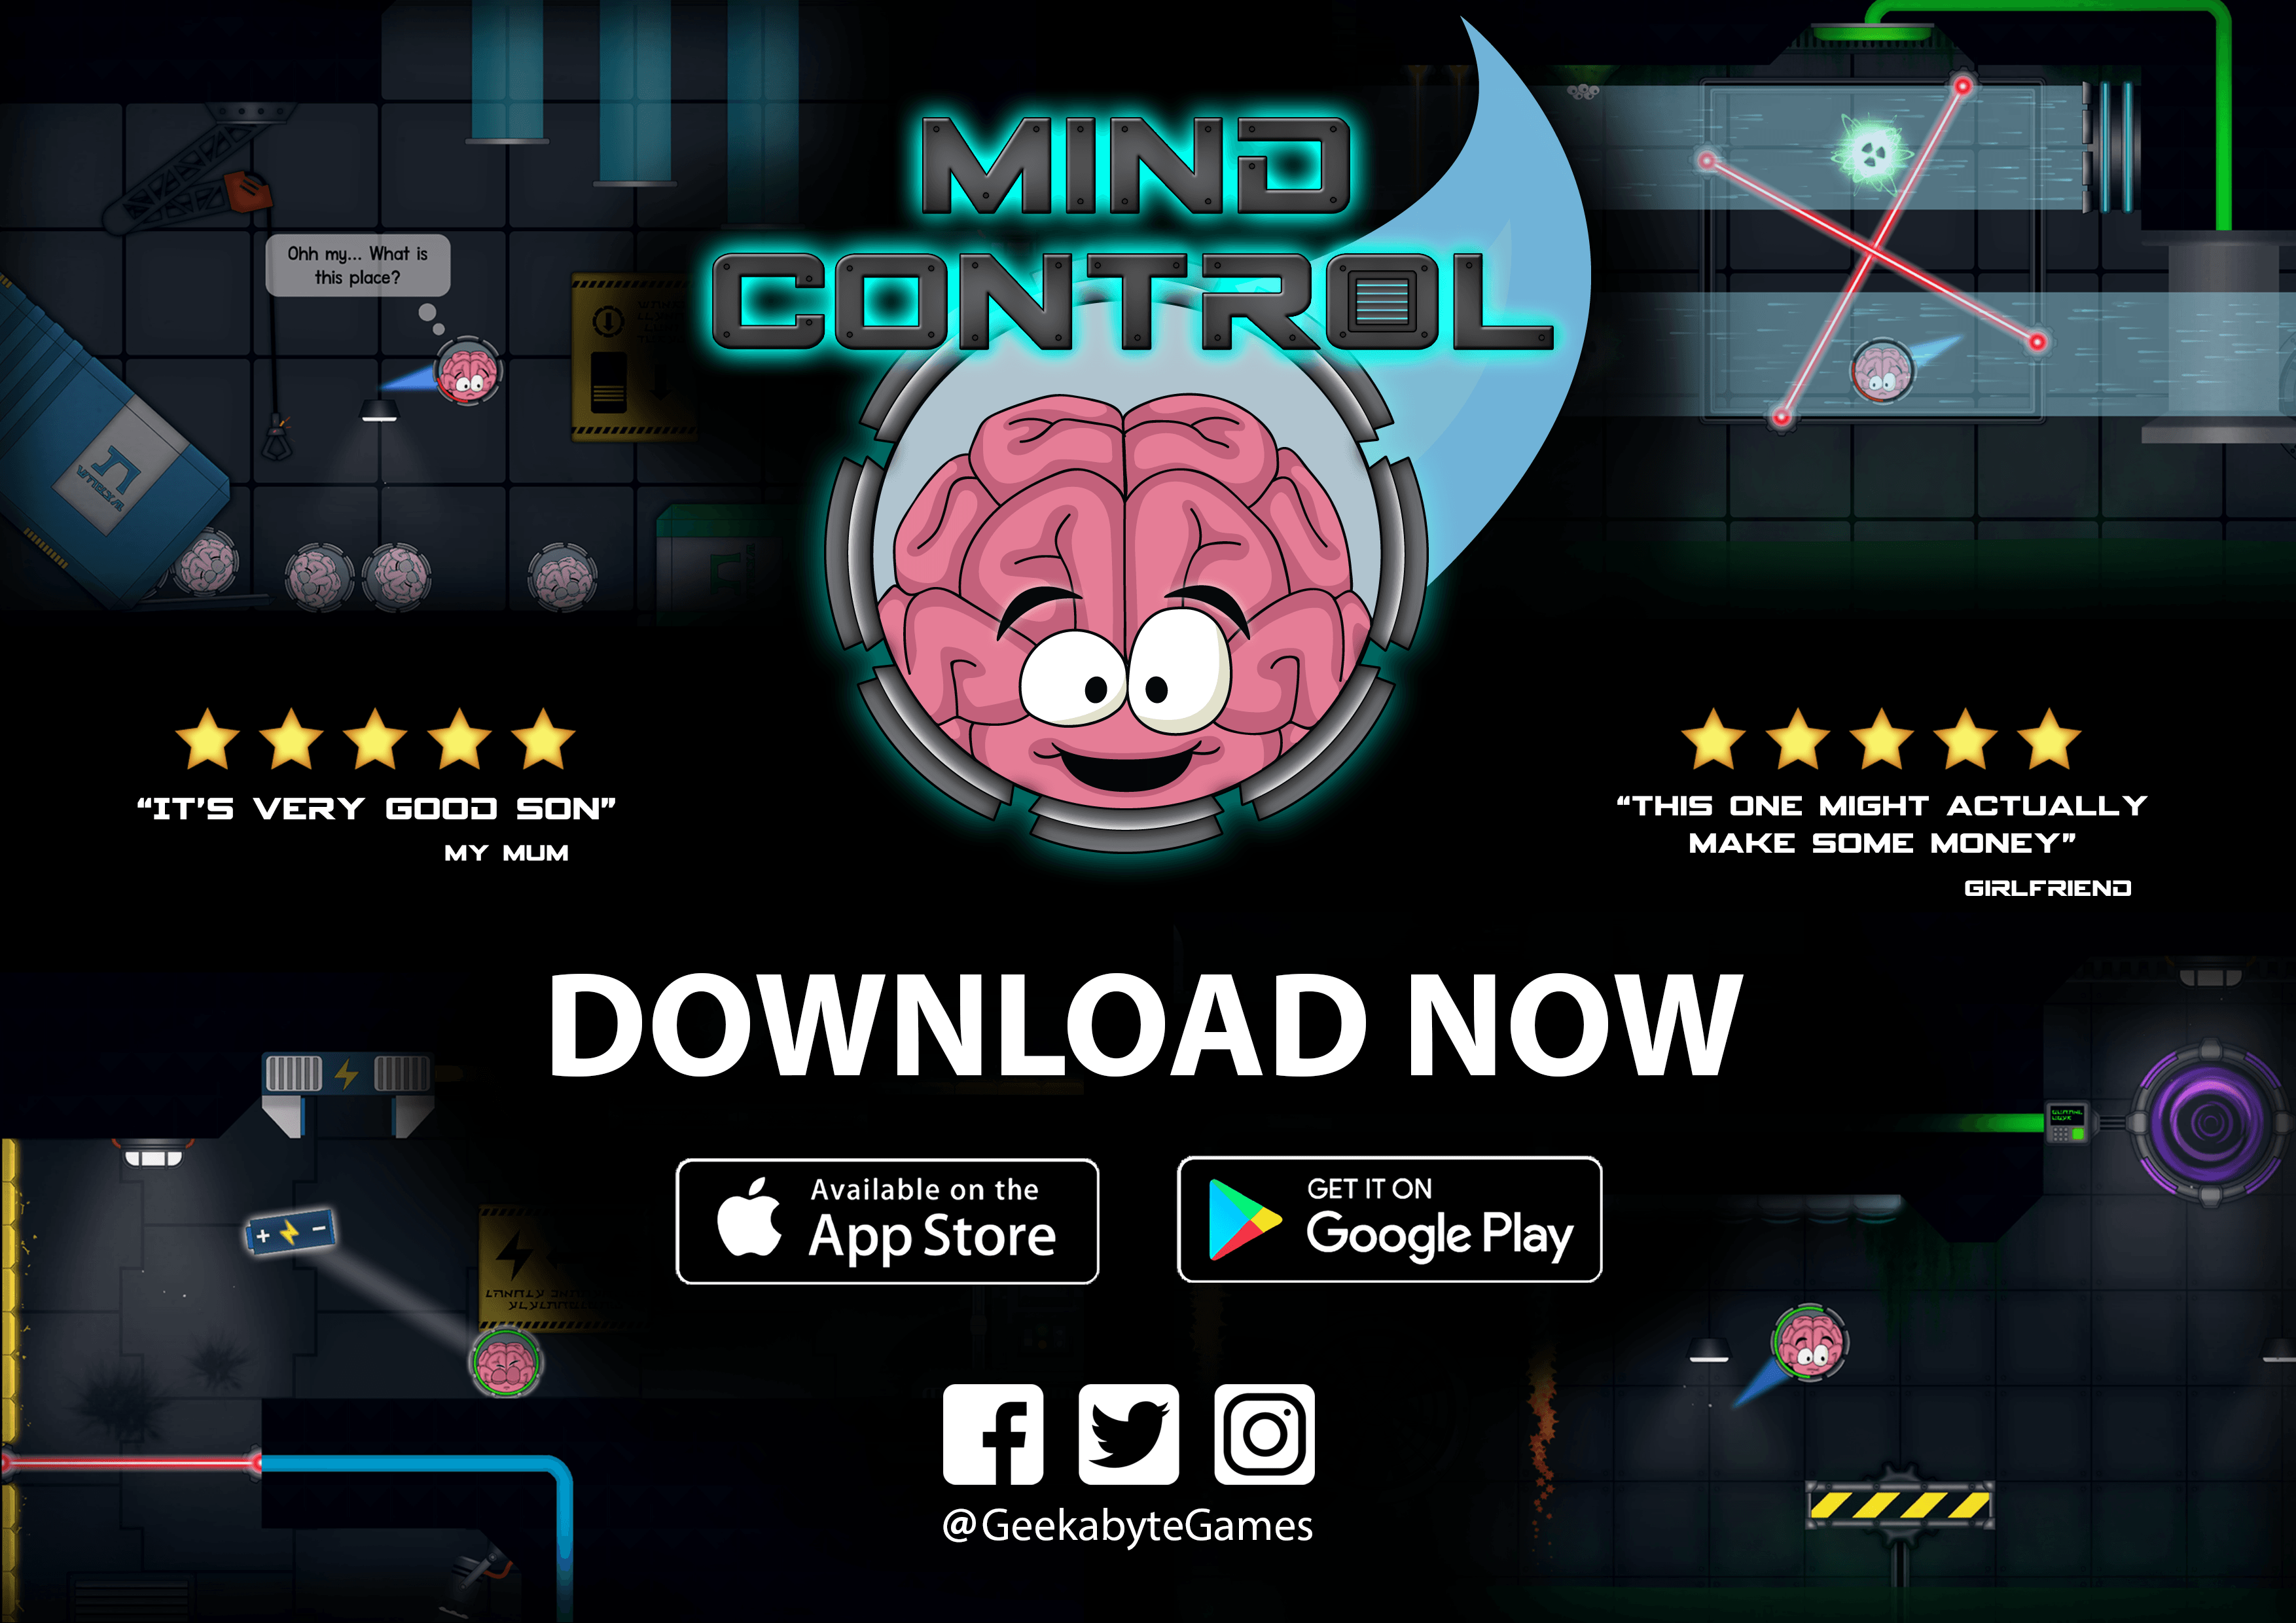 Mind Controling App Logo - Mind Control live on Android and iOS FREE download! news - Mod DB